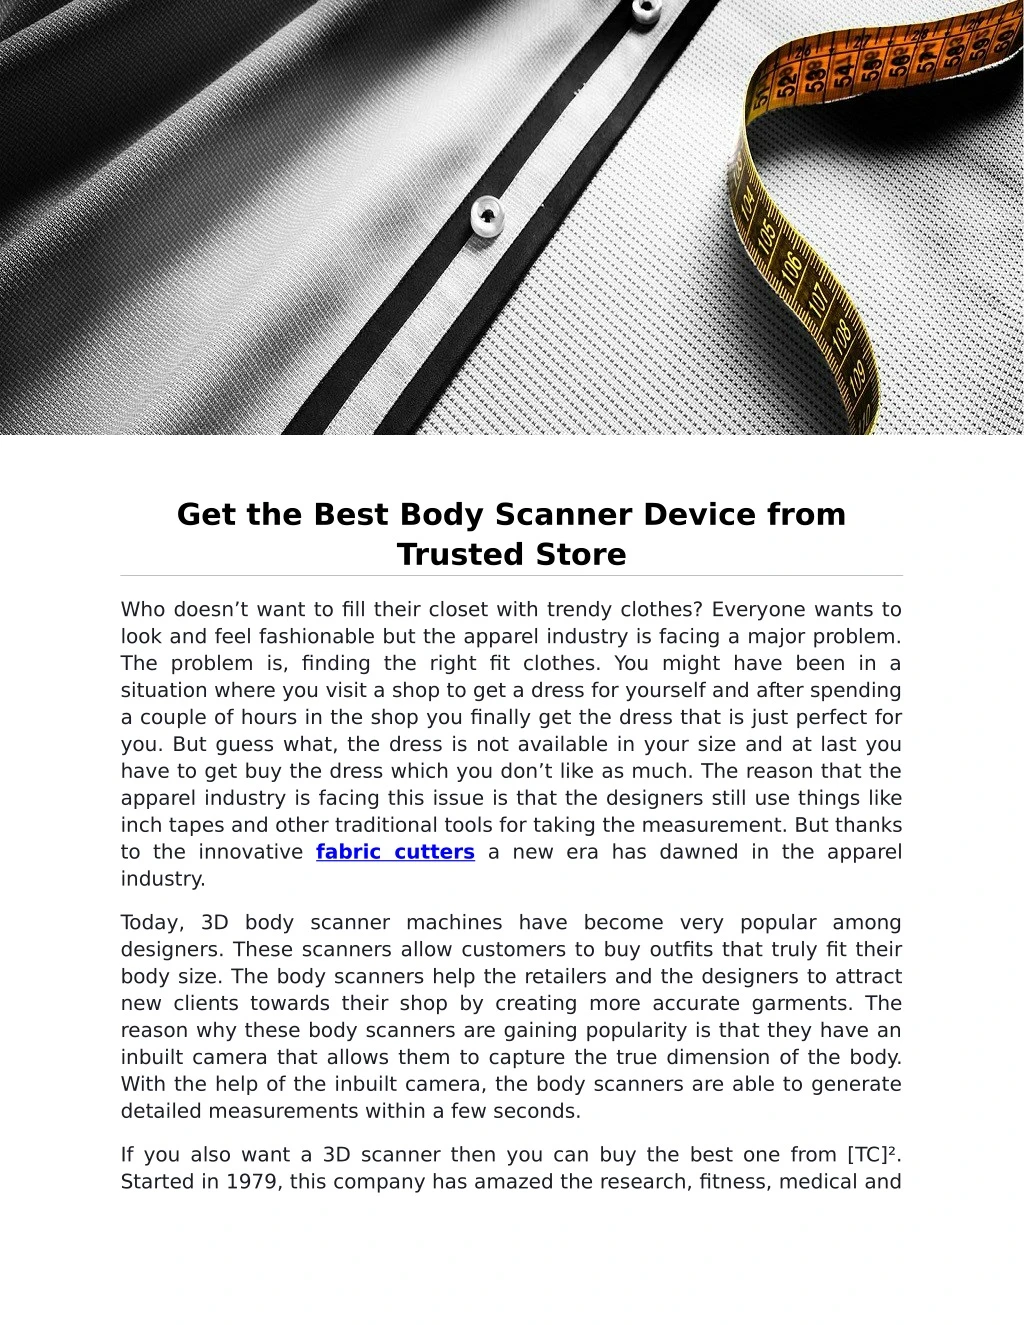 get the best body scanner device from trusted